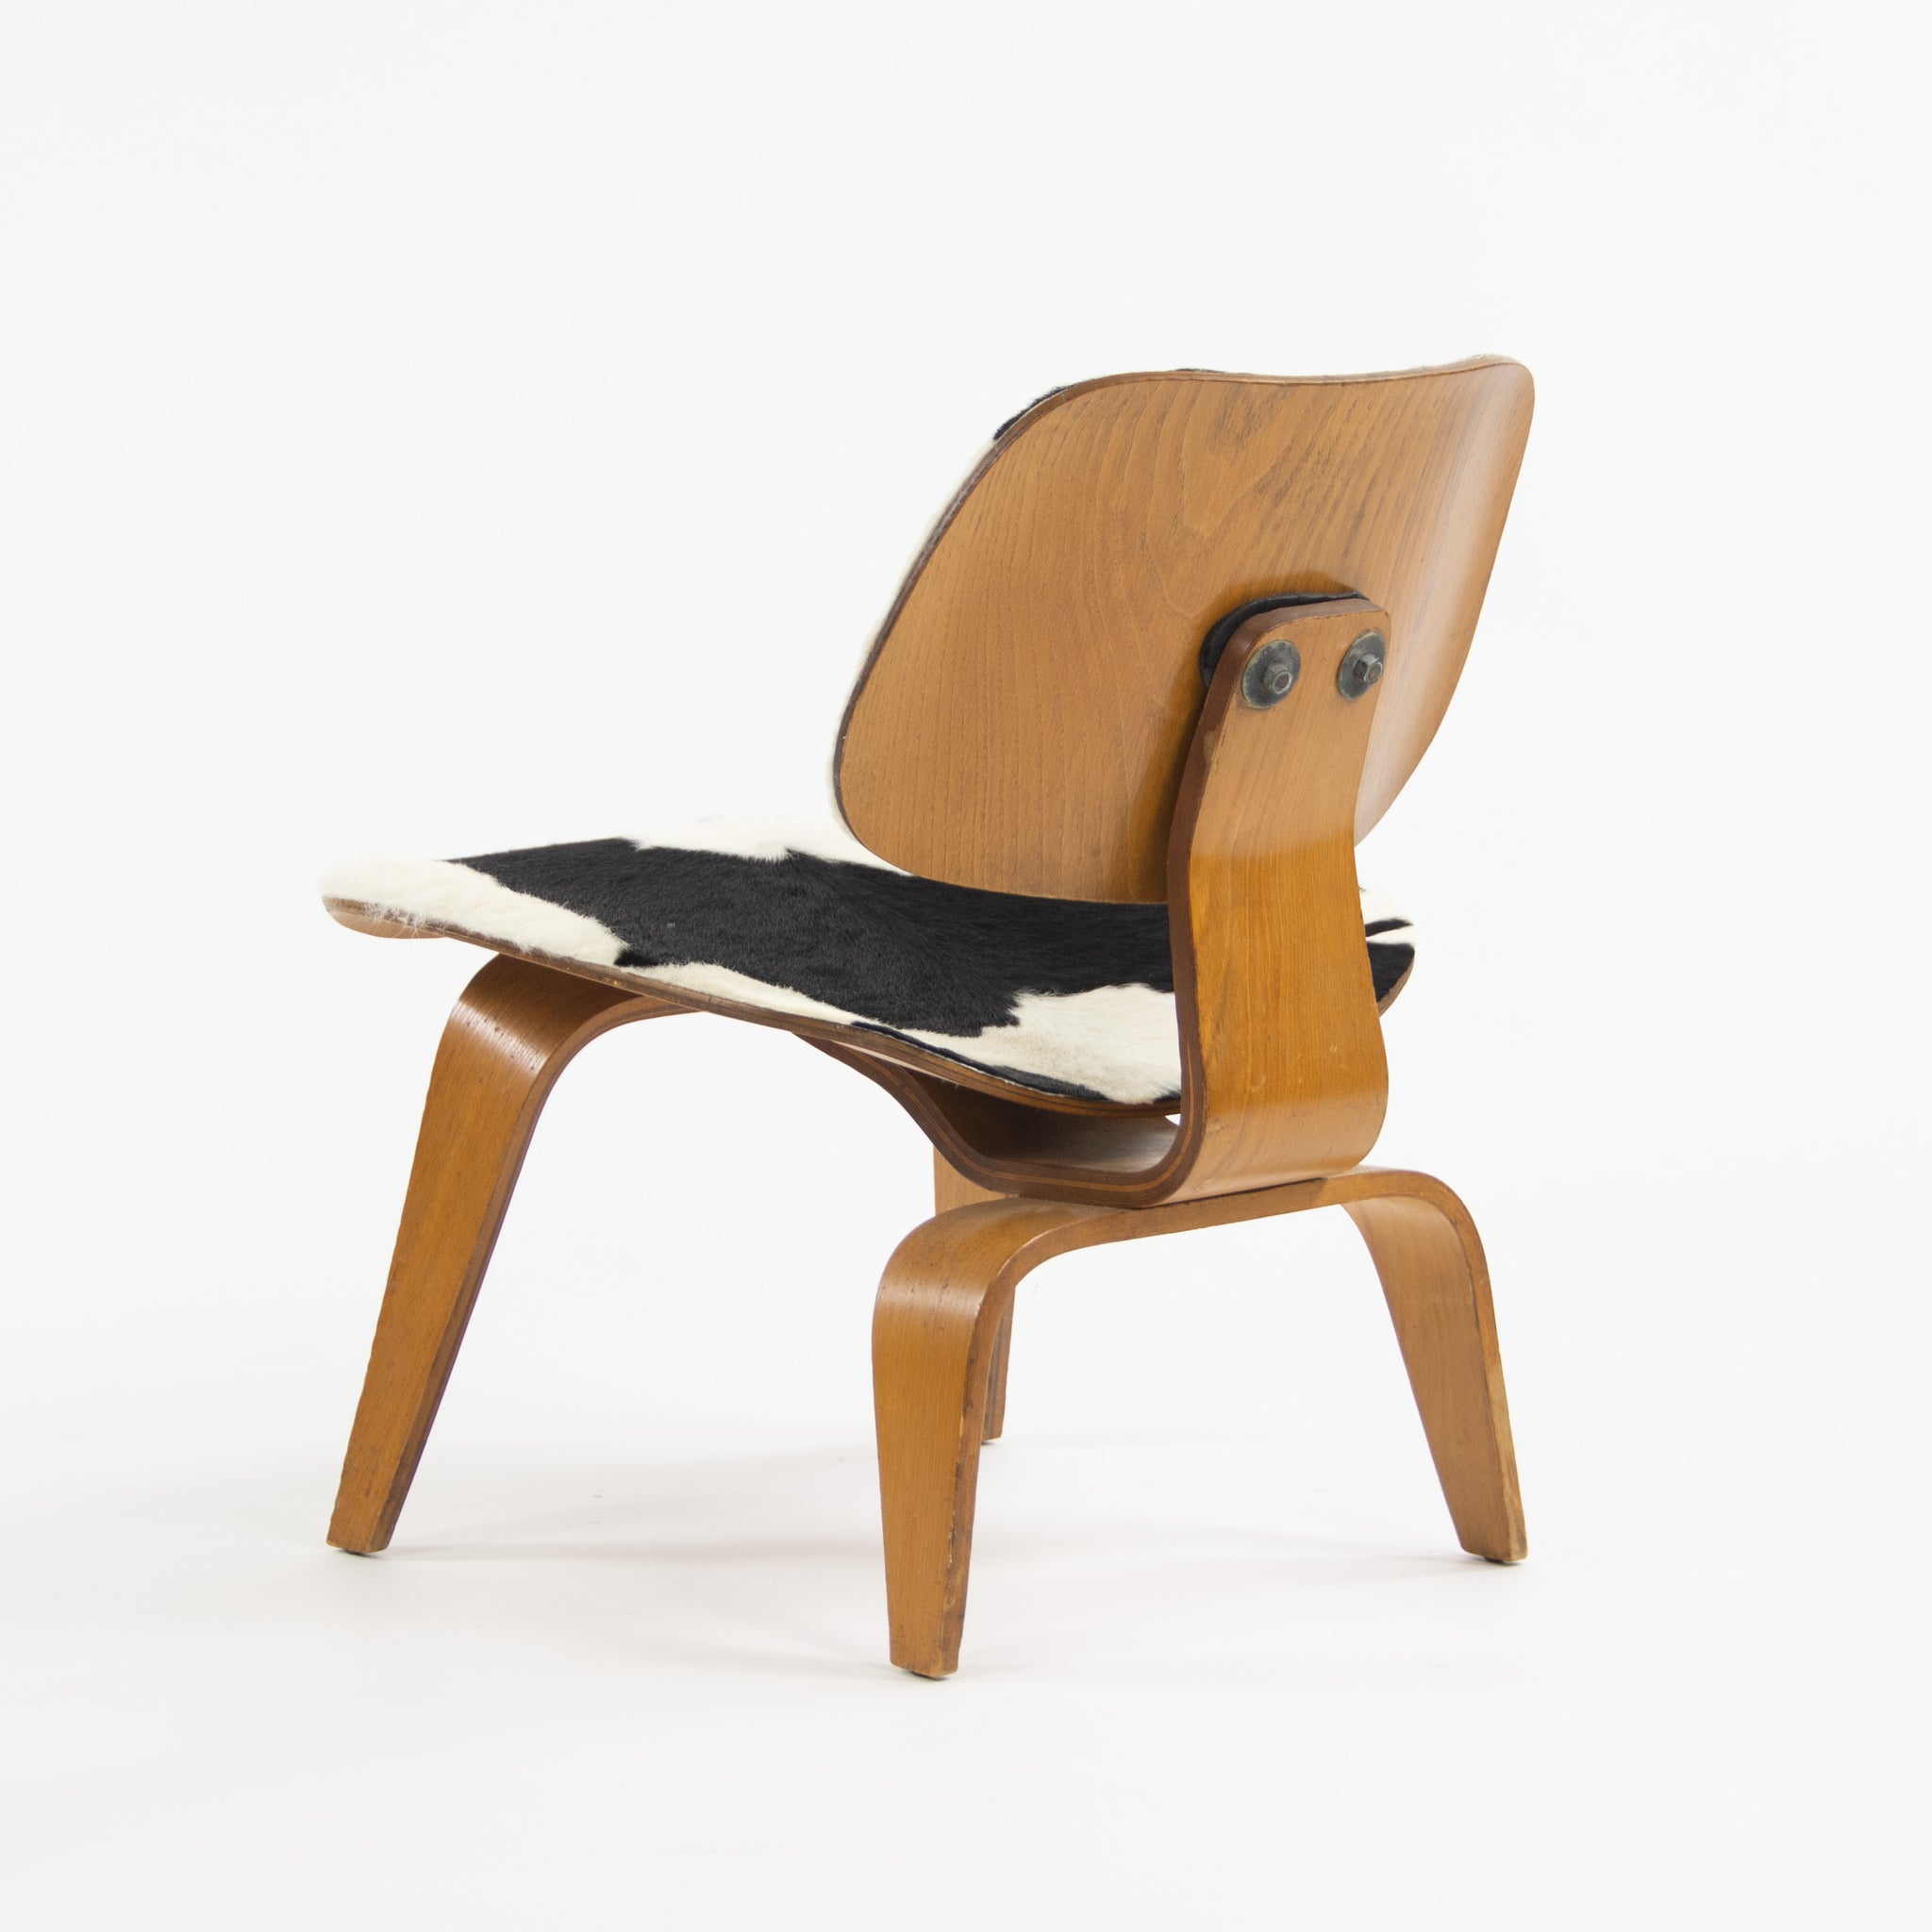 SOLD Charles and Ray Eames 1948 Evans LCW Lounge Chair Wood Ash Pony Hide